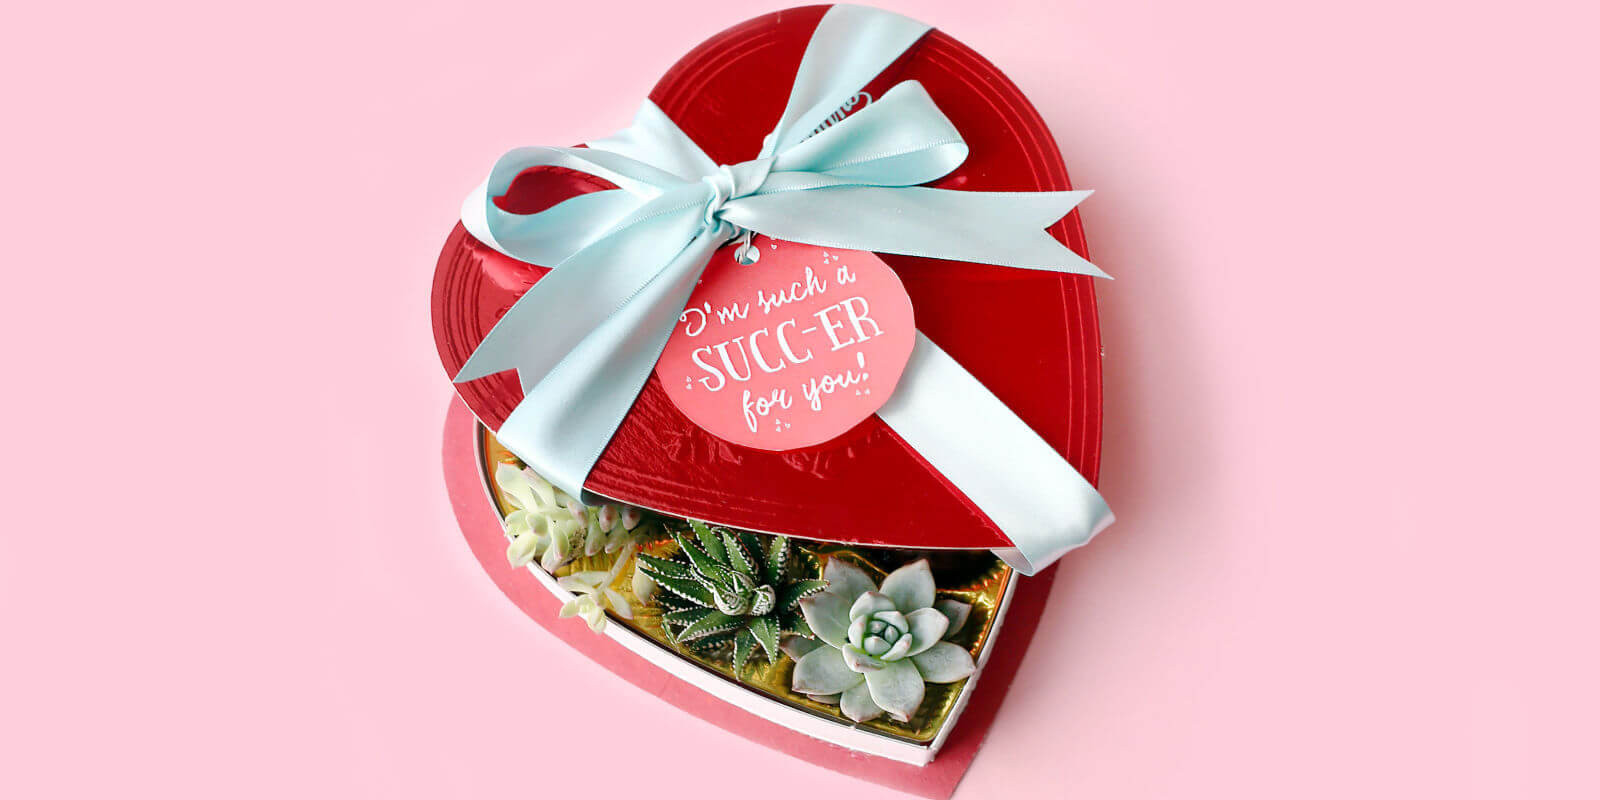 Top Valentines Day Gift Ideas
 45 Homemade Valentines Day Gift Ideas For Him